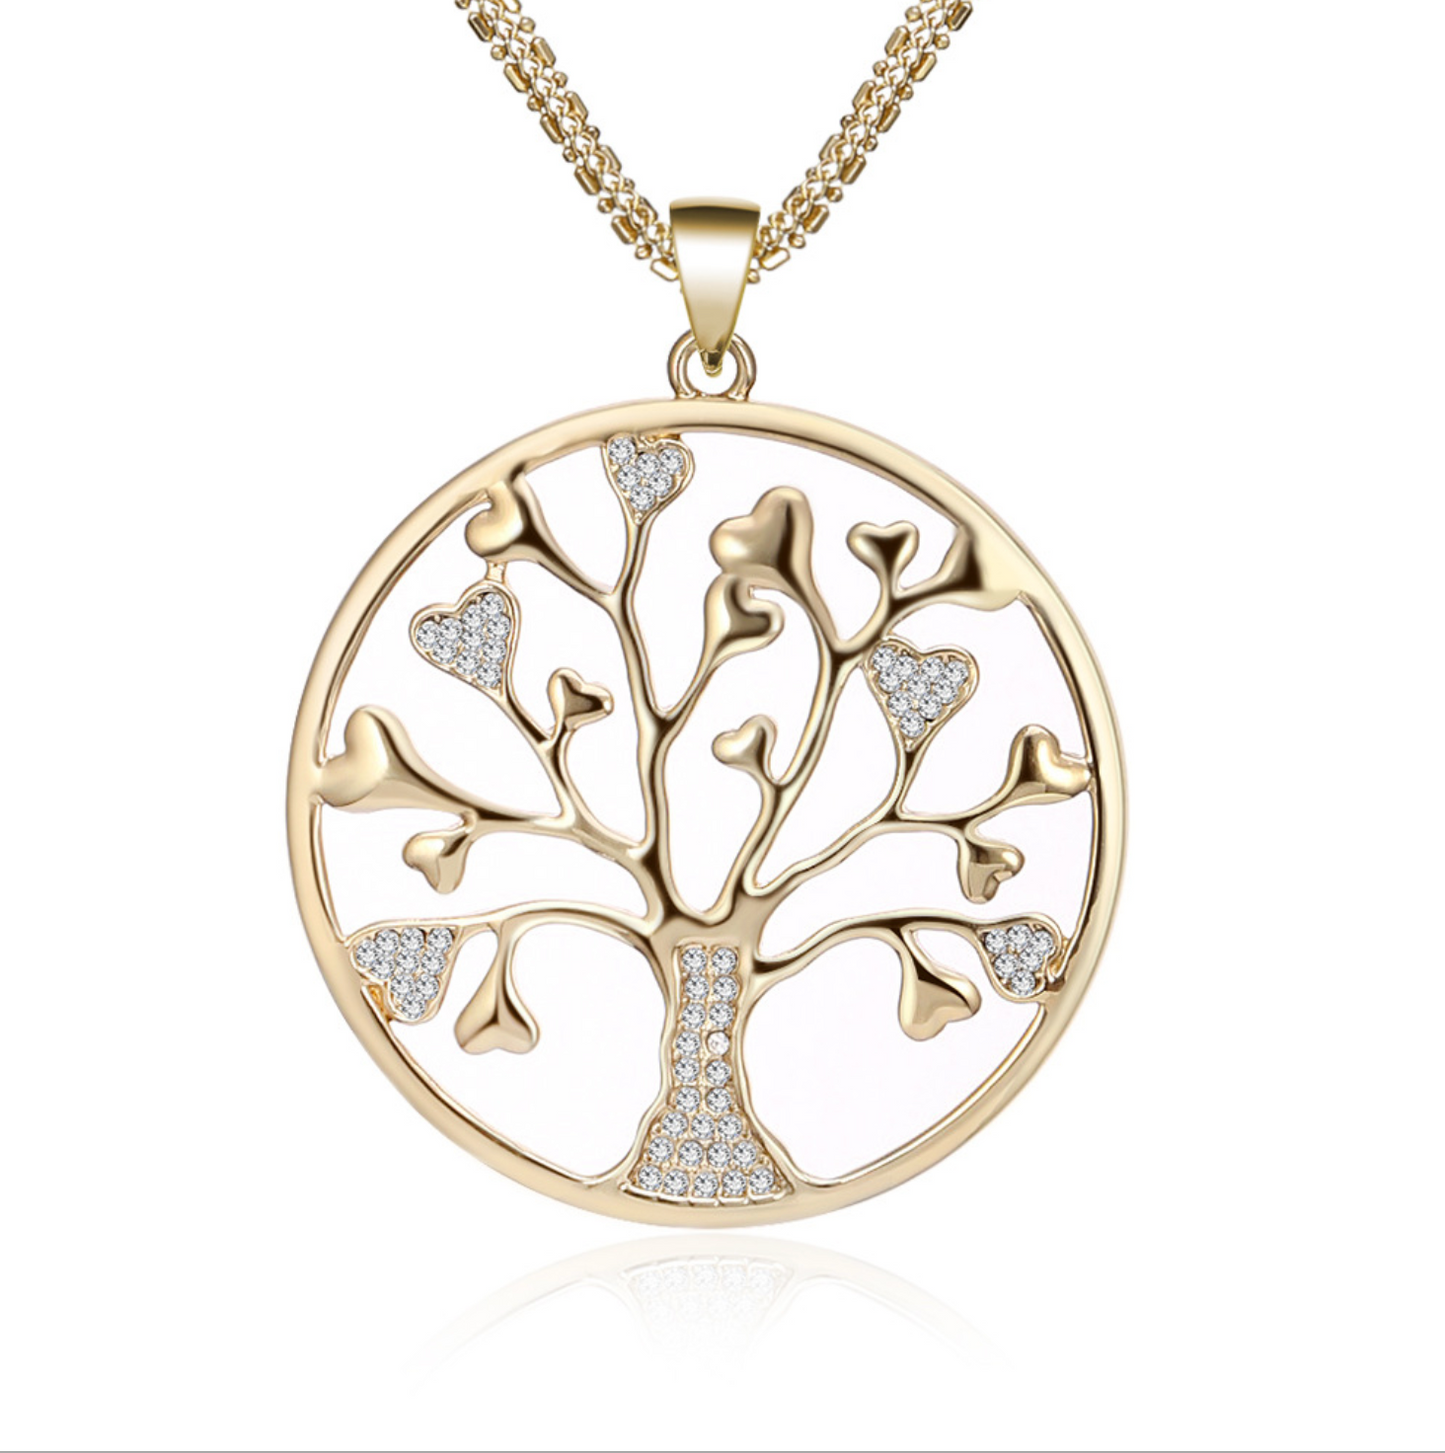 Large Tree Necklace